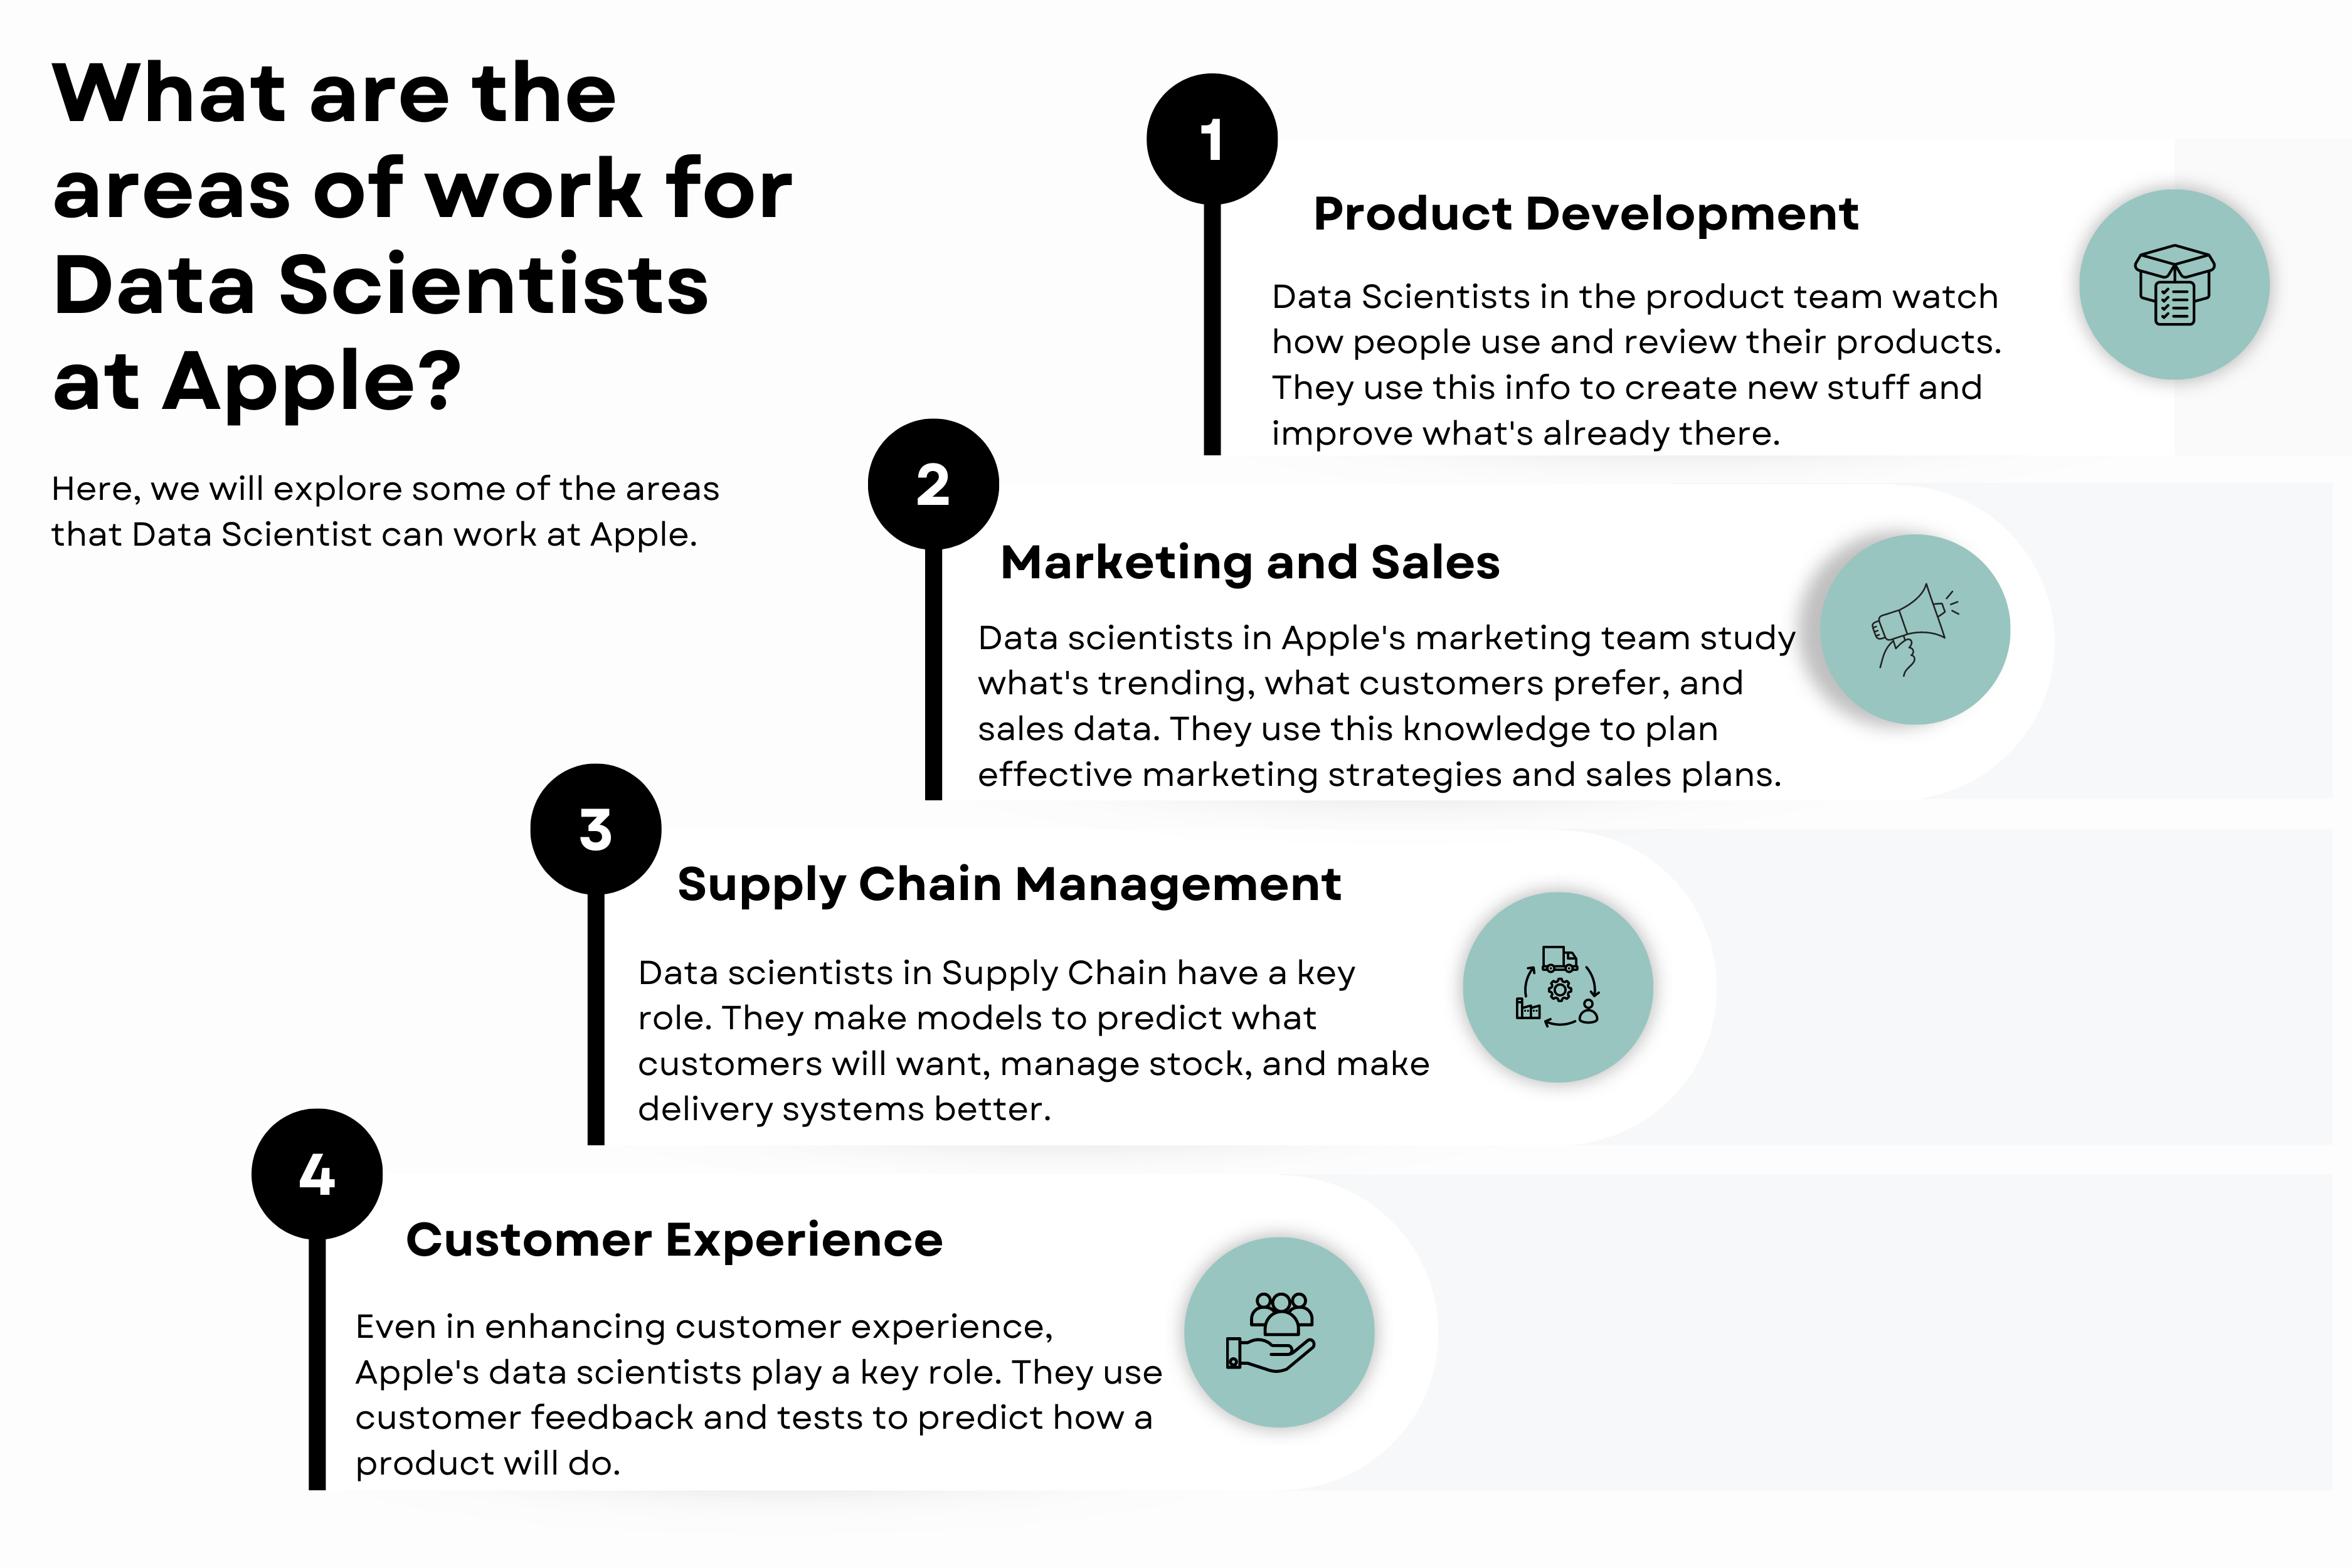 What Are the Areas of Work for Data Scientists at Apple